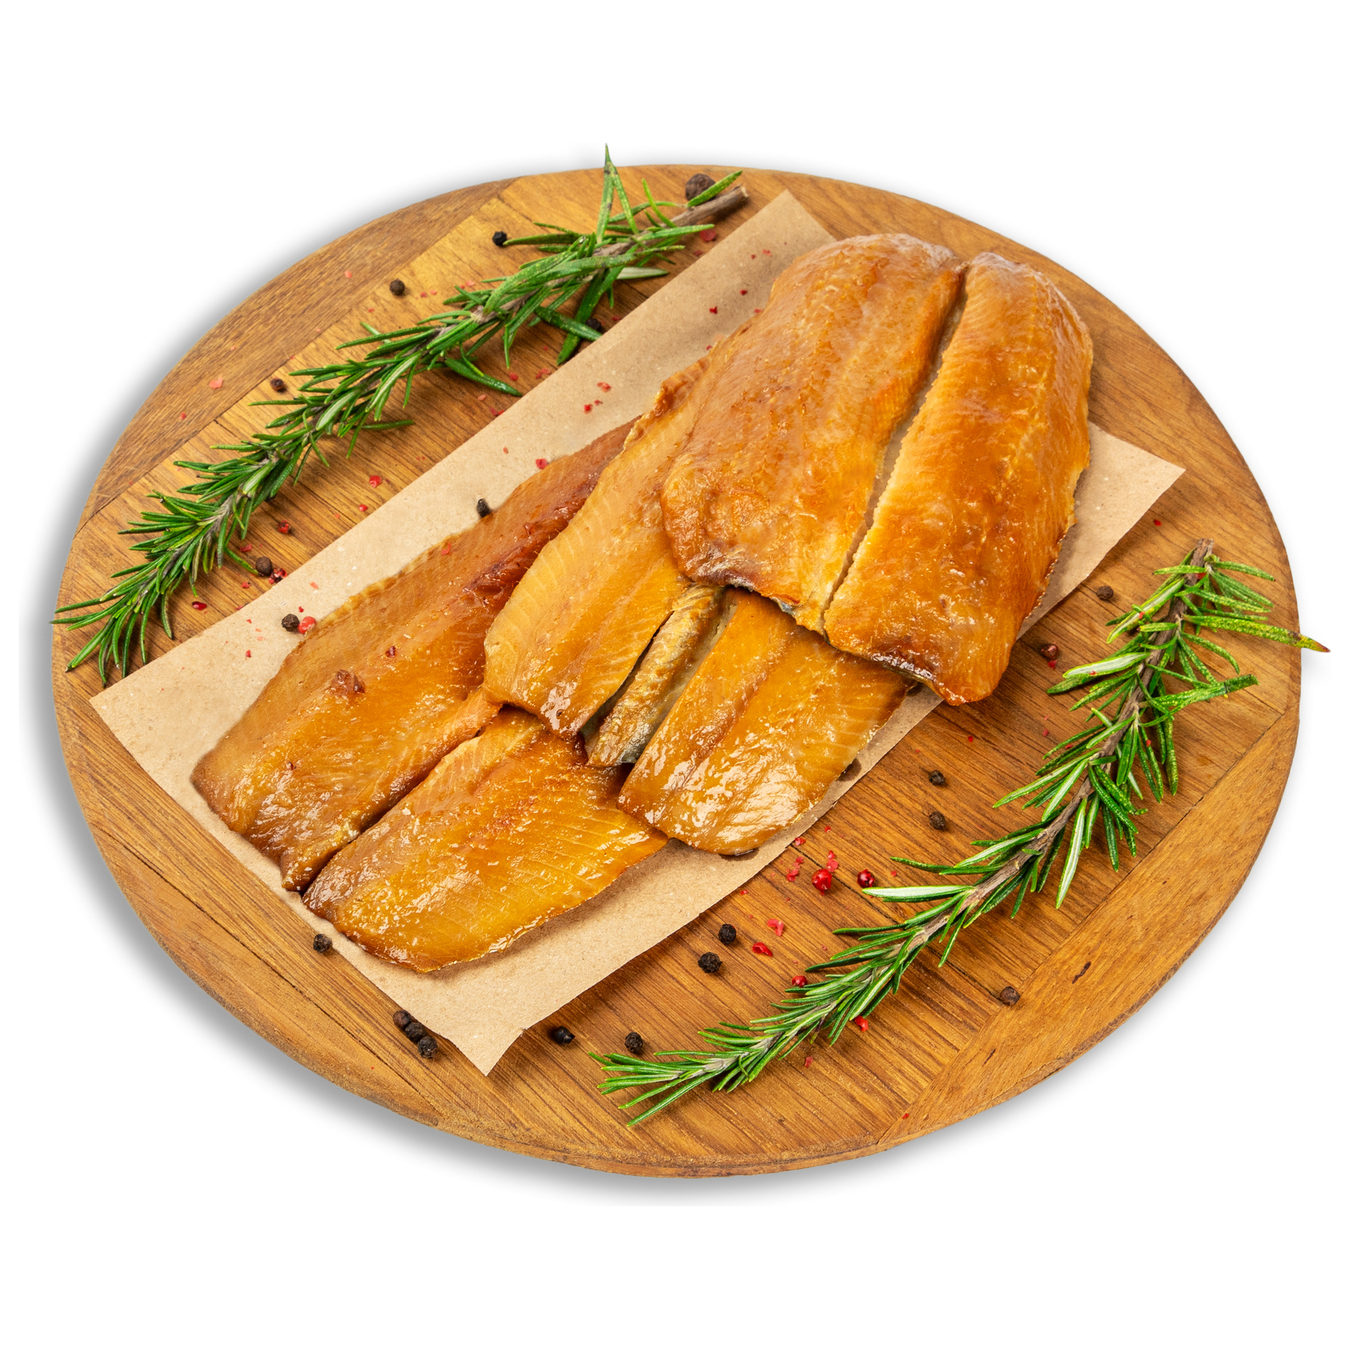 Cold smoked herring fillet